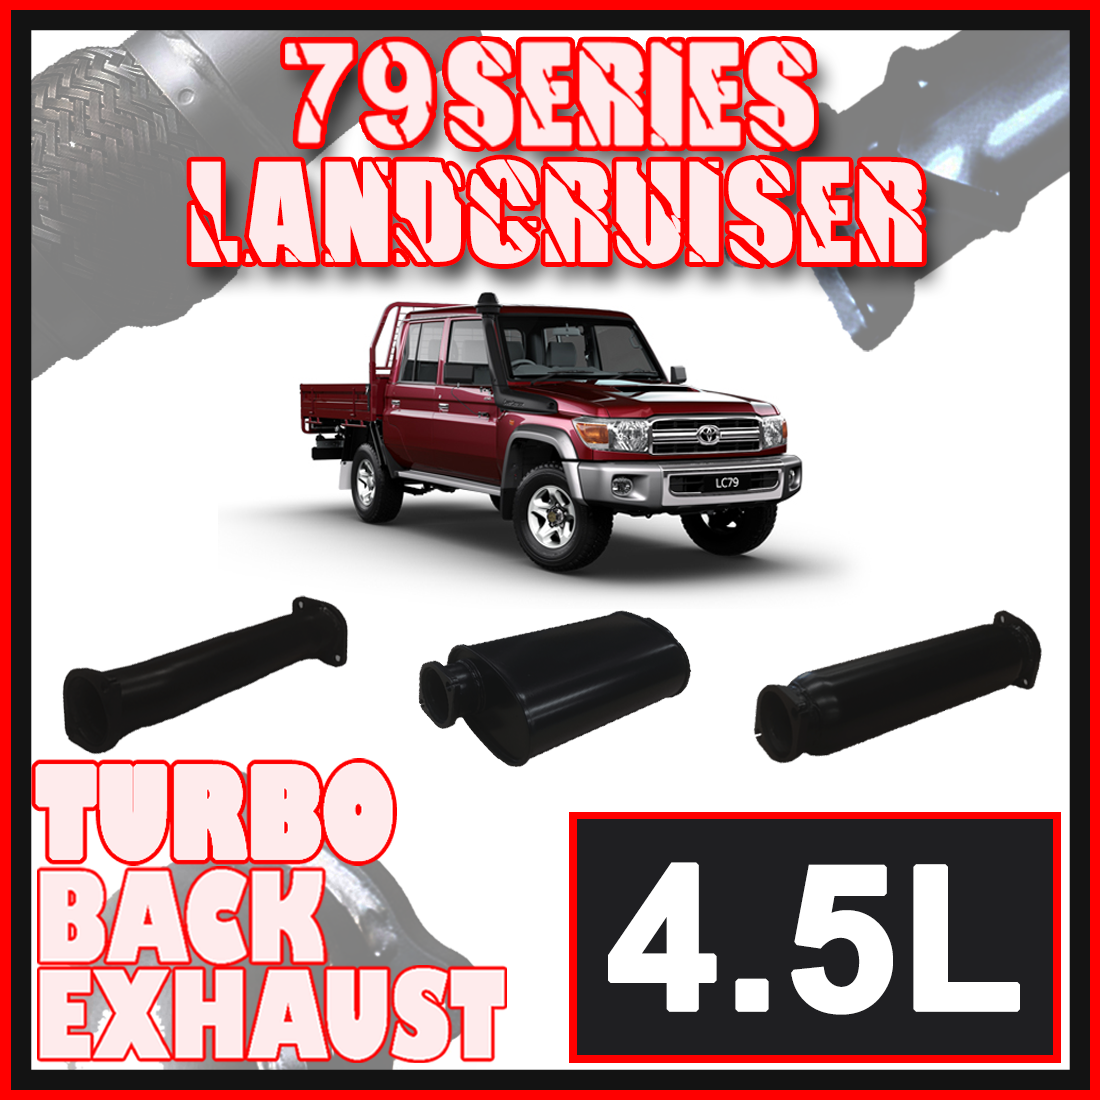 Toyota Landcruiser Exhaust 79 Series Dual Cab 3" Turbo Back Systems image